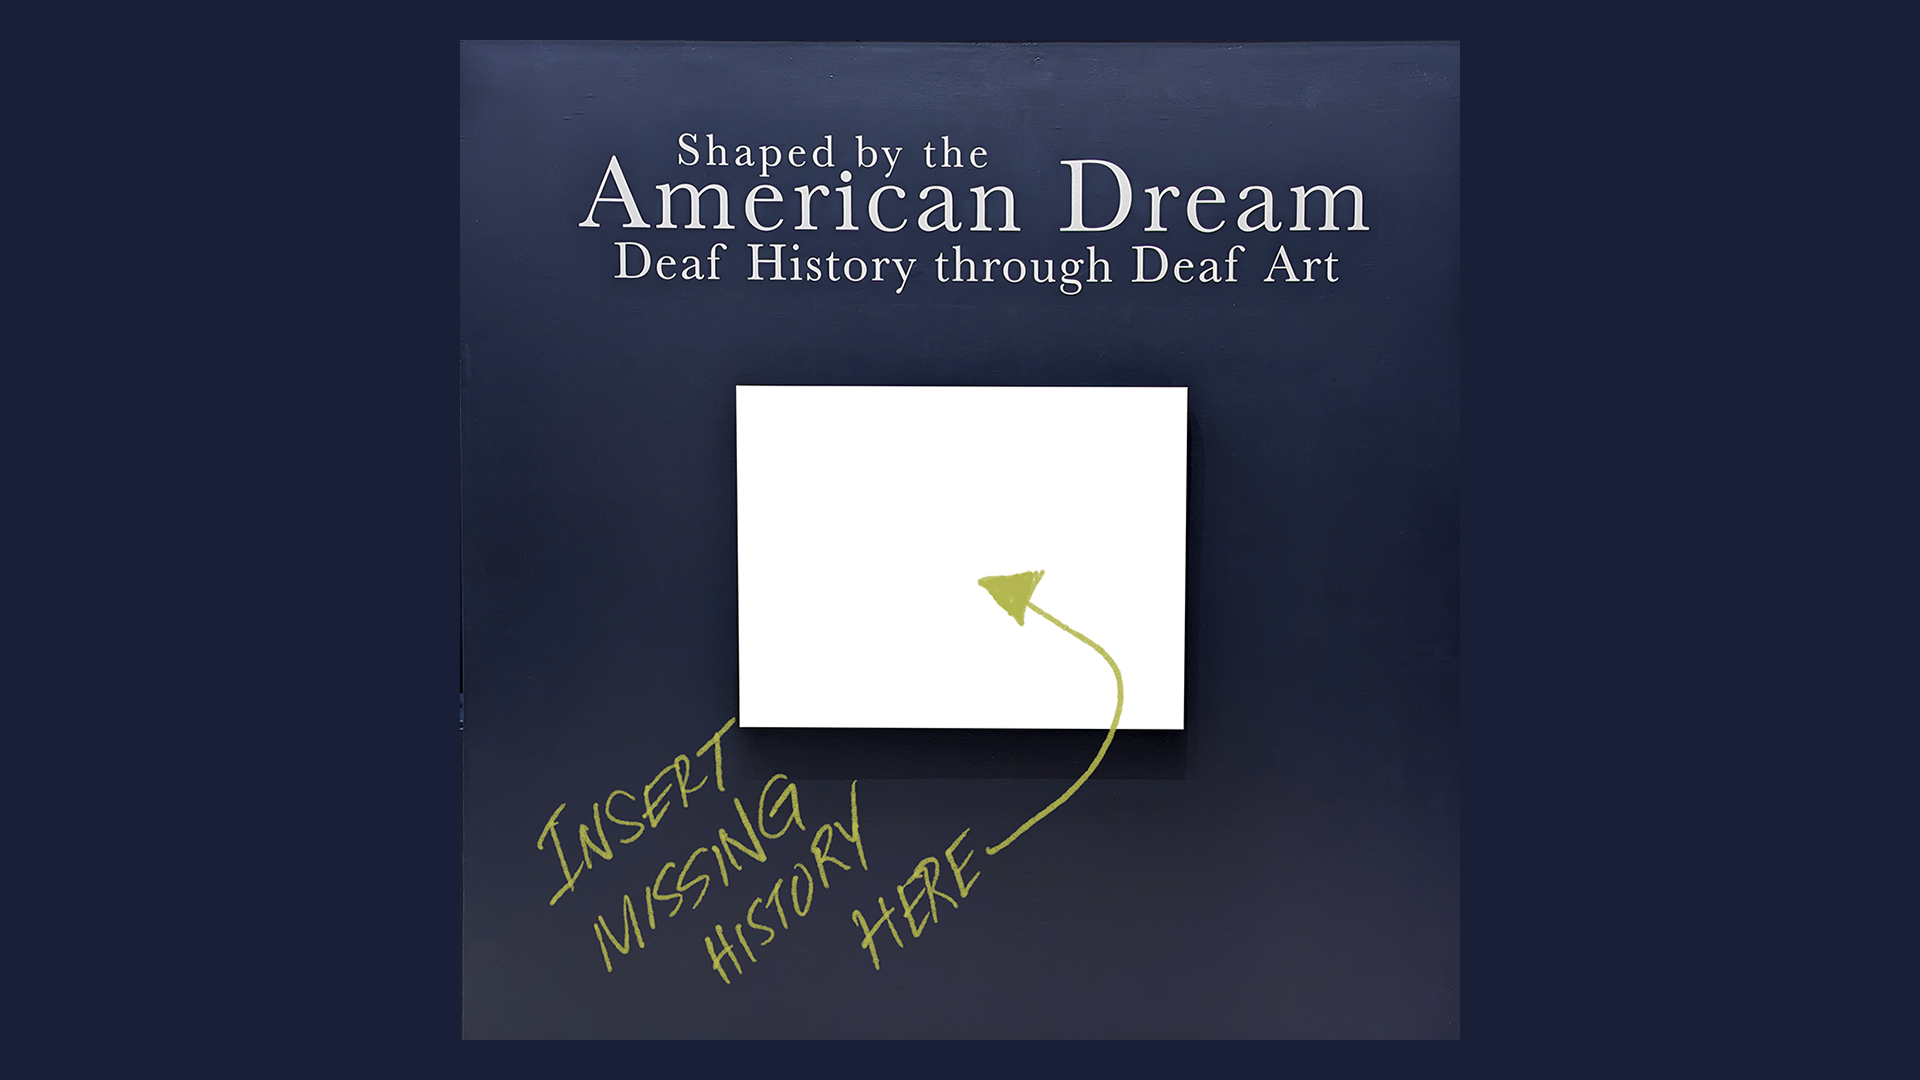 Image description A picture of blank white rectangle with a midnight blue background. The white text above the rectangle reads: Shaped by the American Dream, Deaf History through Deaf Art. Below the rectangle, a handwritten note in yellow reads: INSERT MISSING HISTORY HERE with an arrow pointing to the white rectangle.